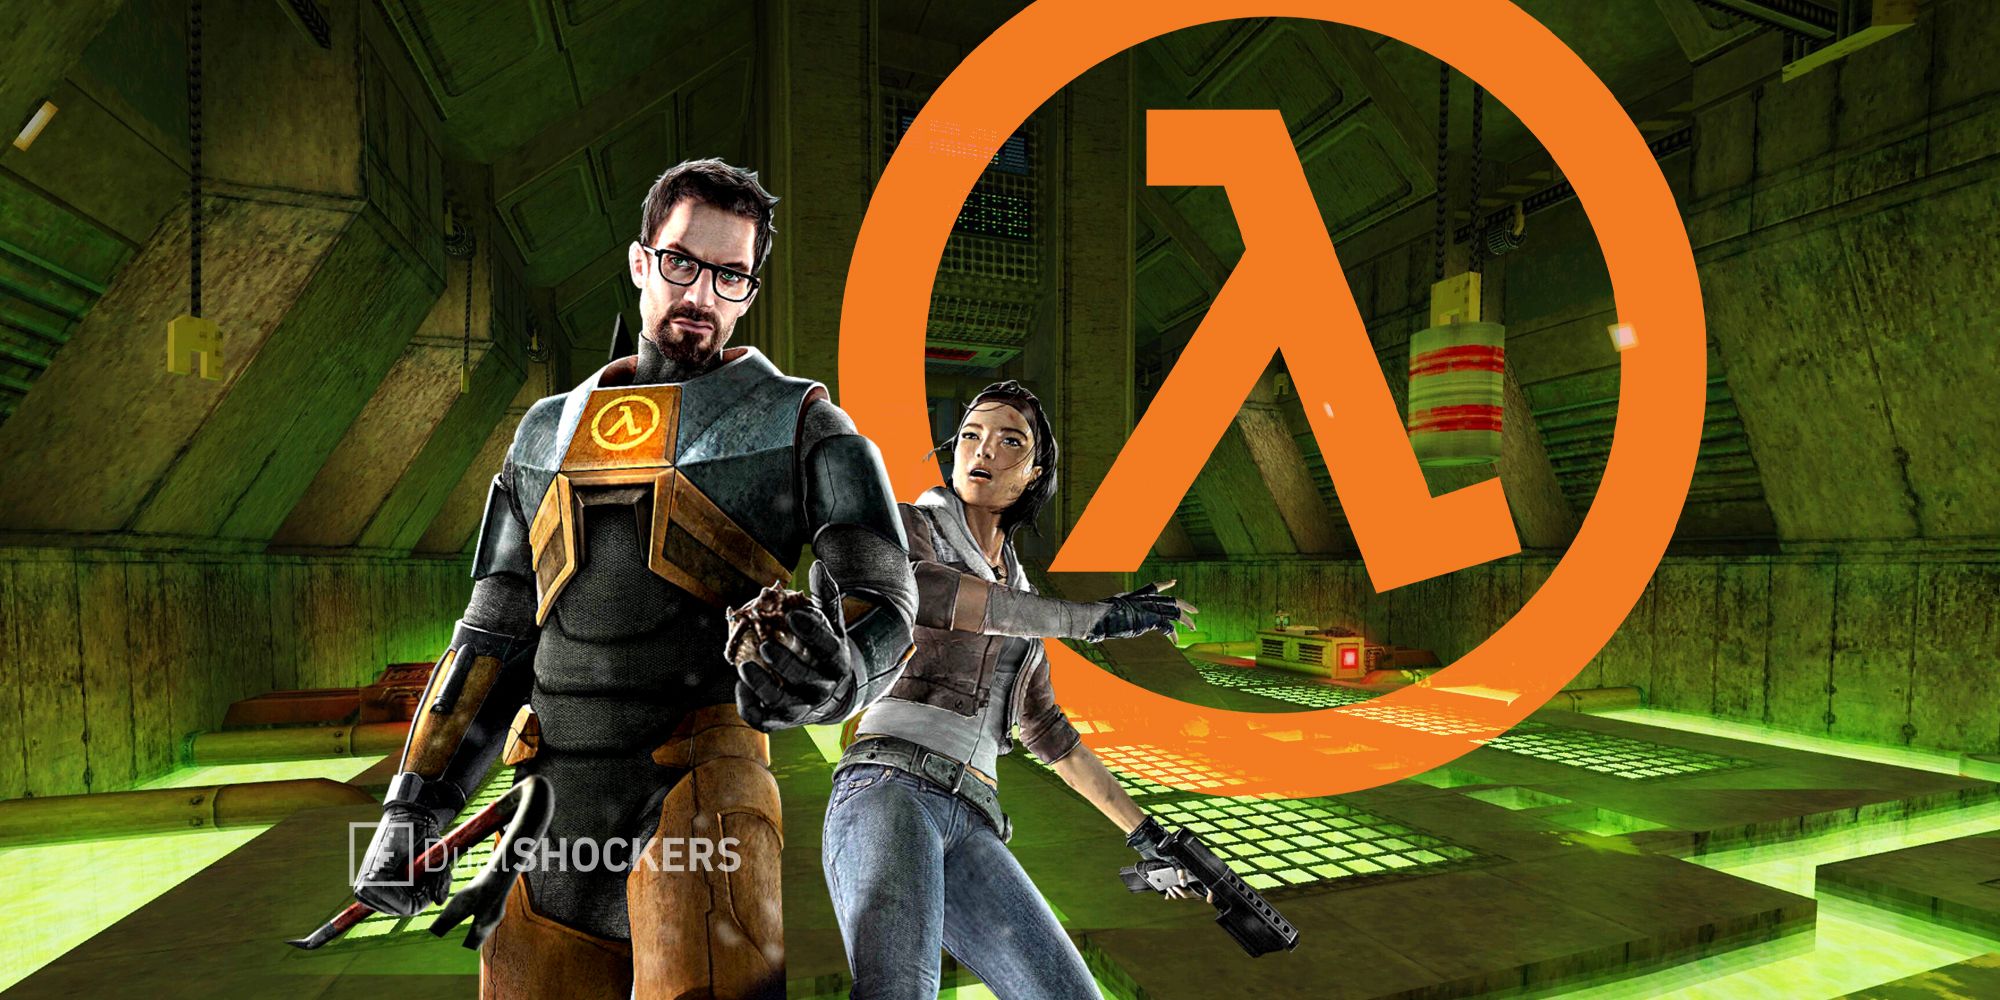 Half-Life 25th anniversary and characters